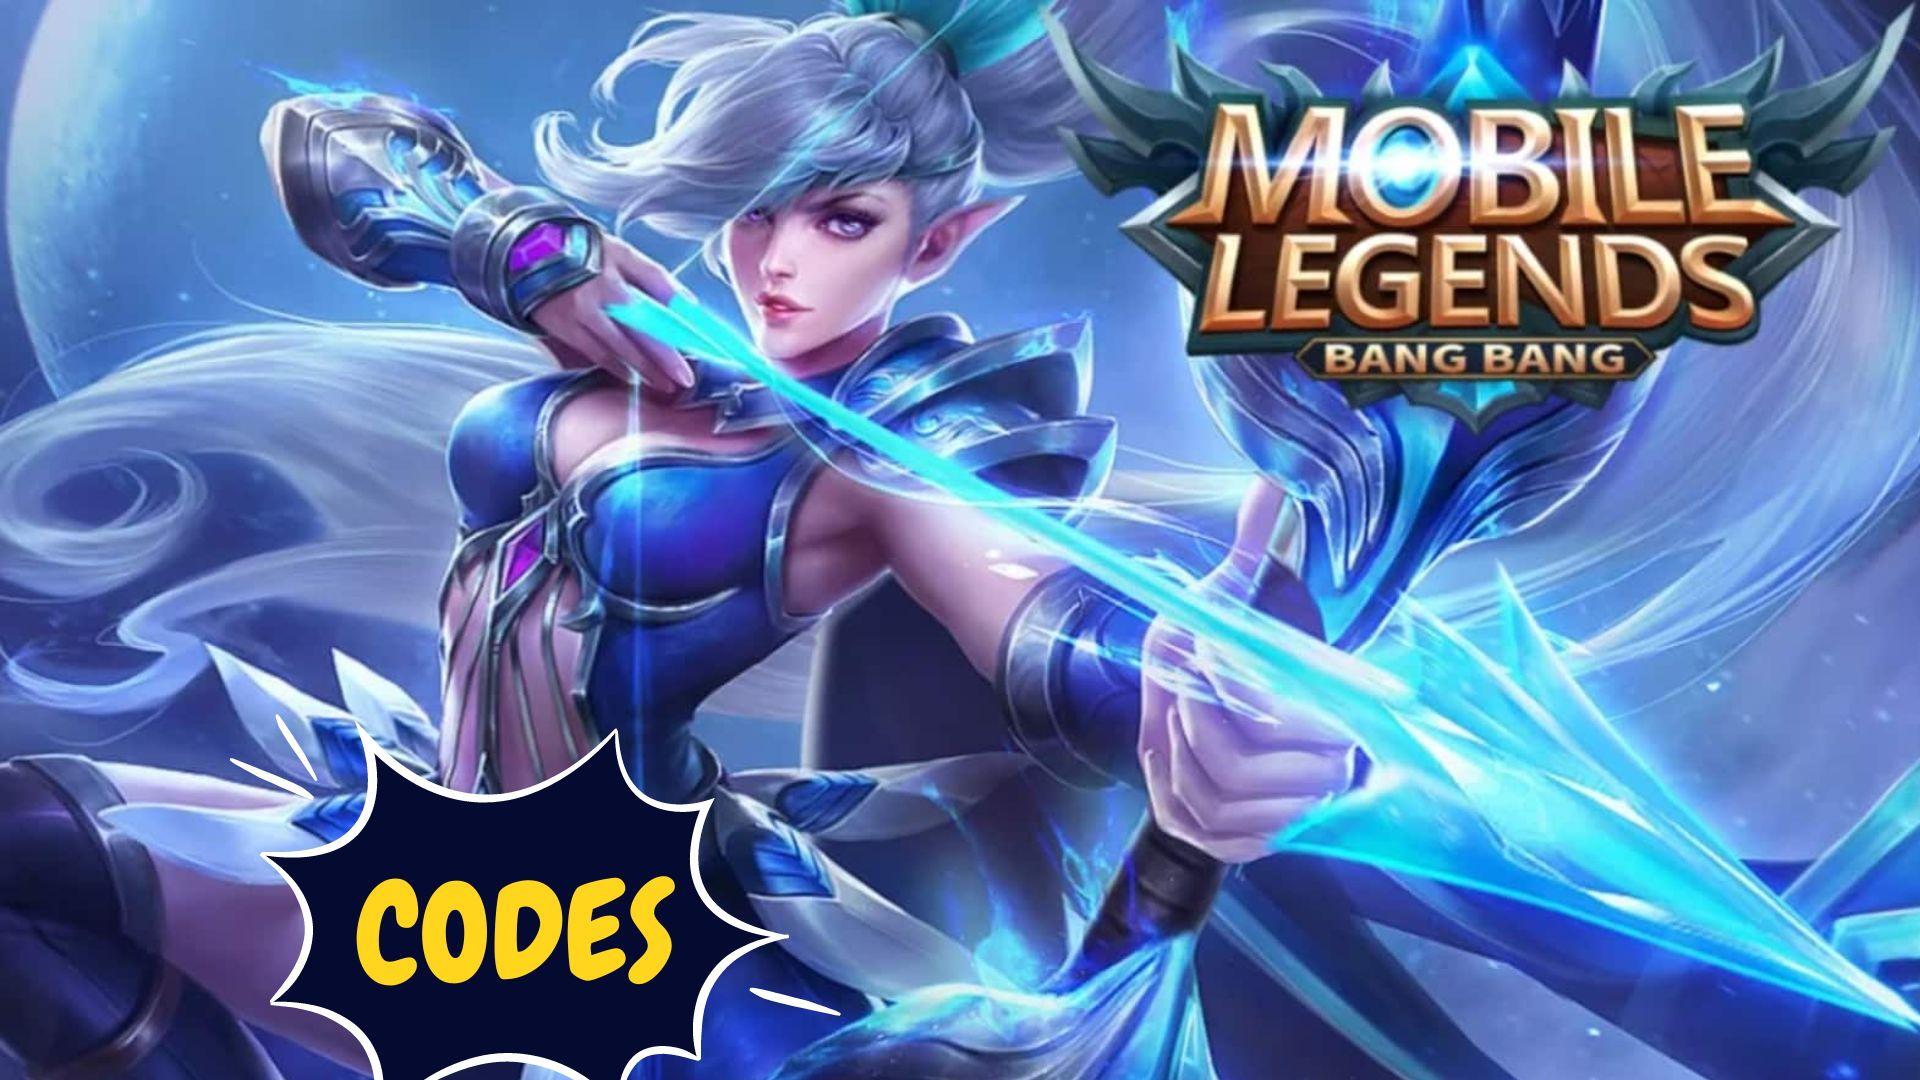 How to rank up fast in Mobile Legends and achieve your goals